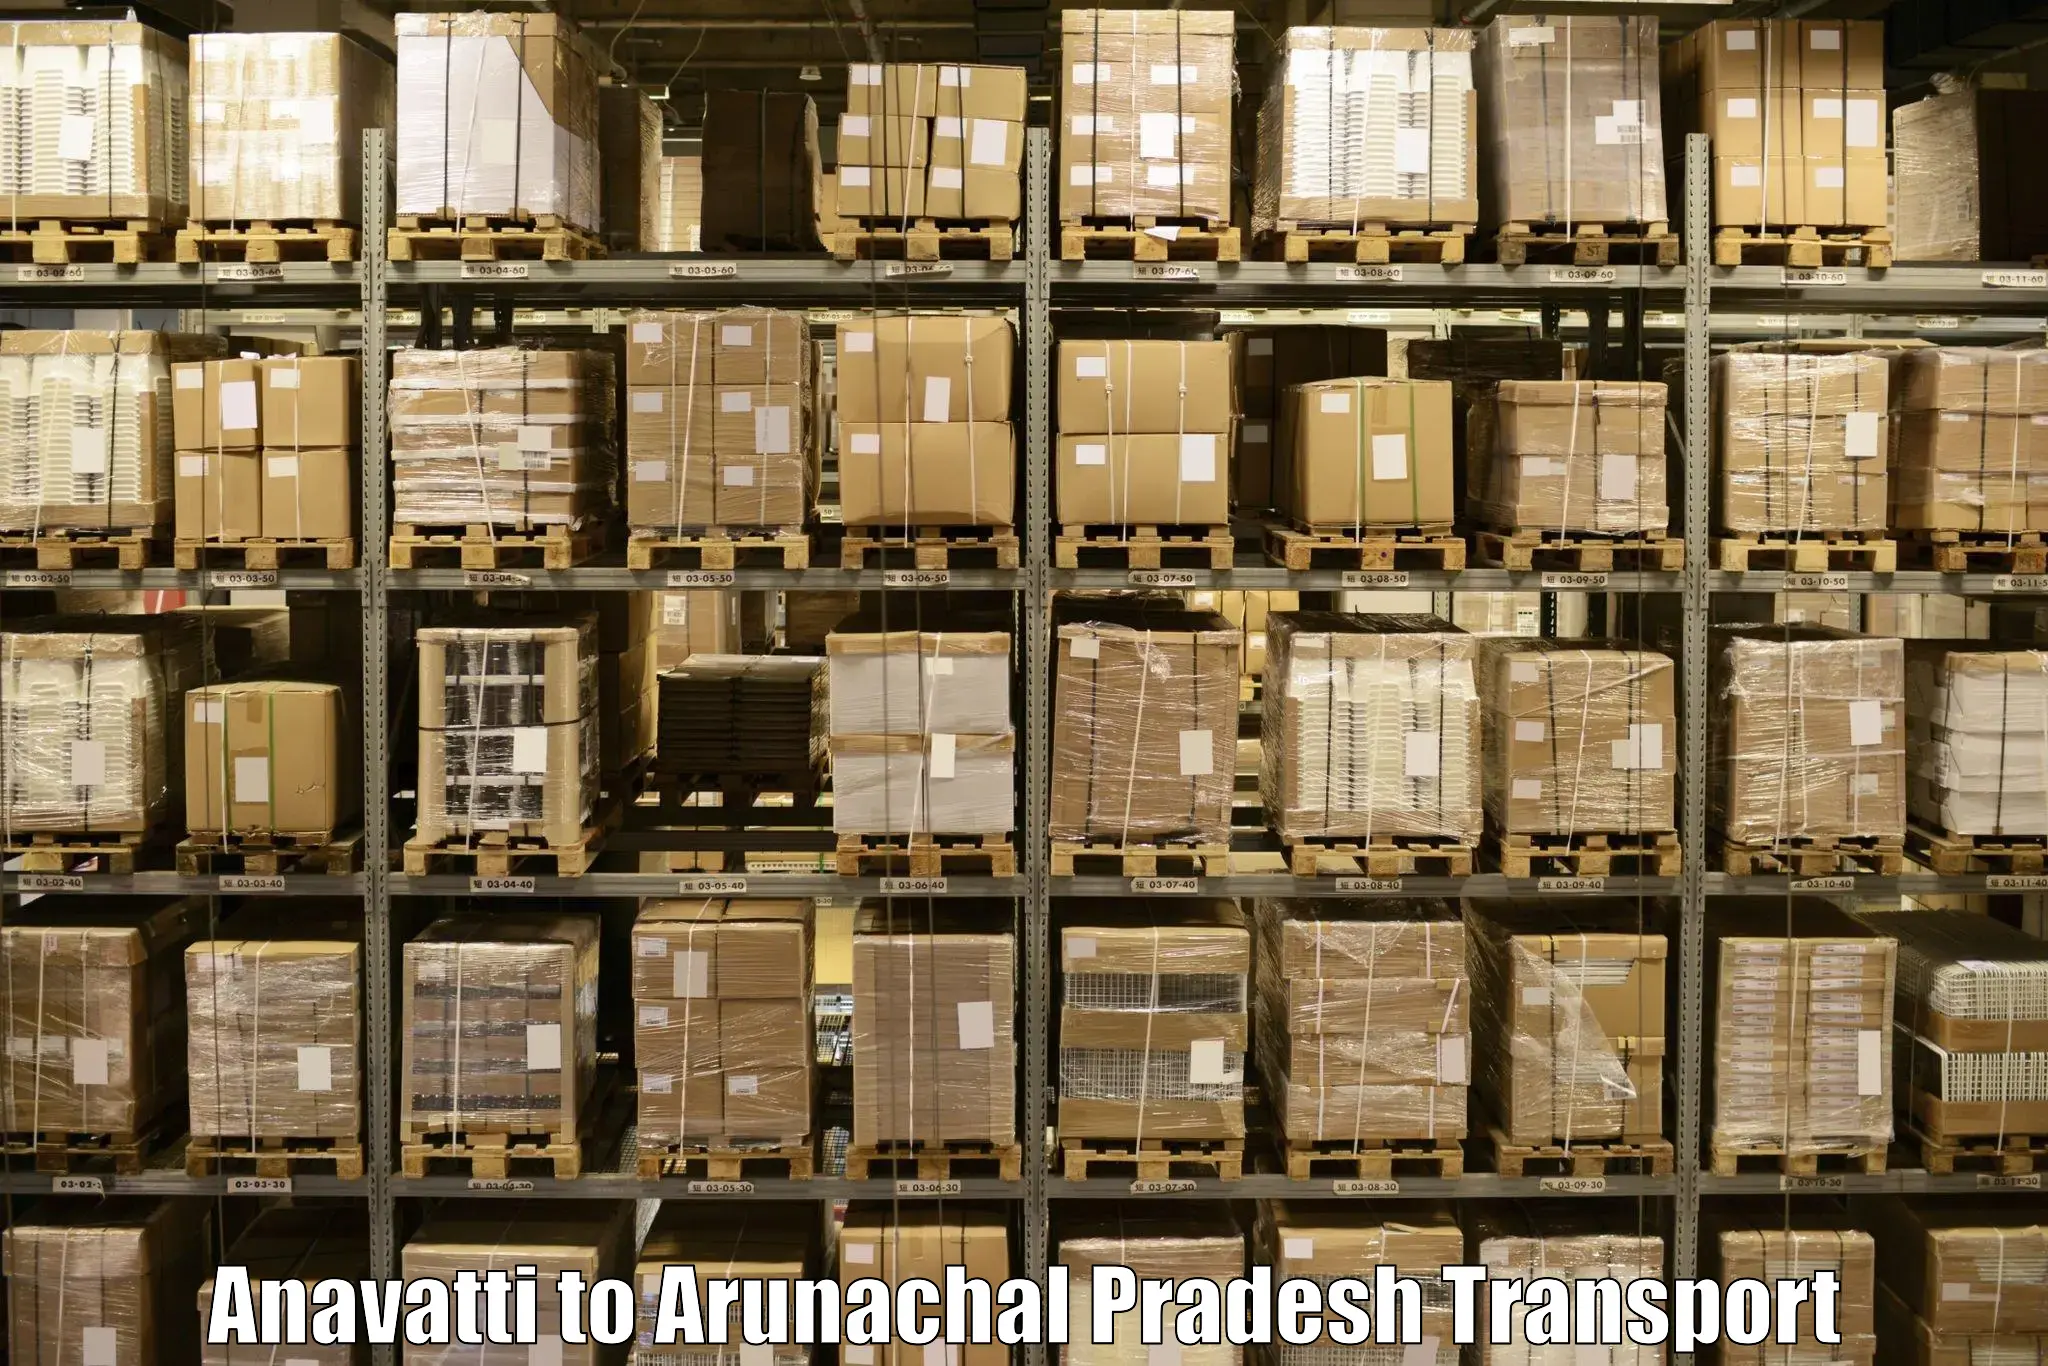 Daily parcel service transport in Anavatti to Lower Dibang Valley